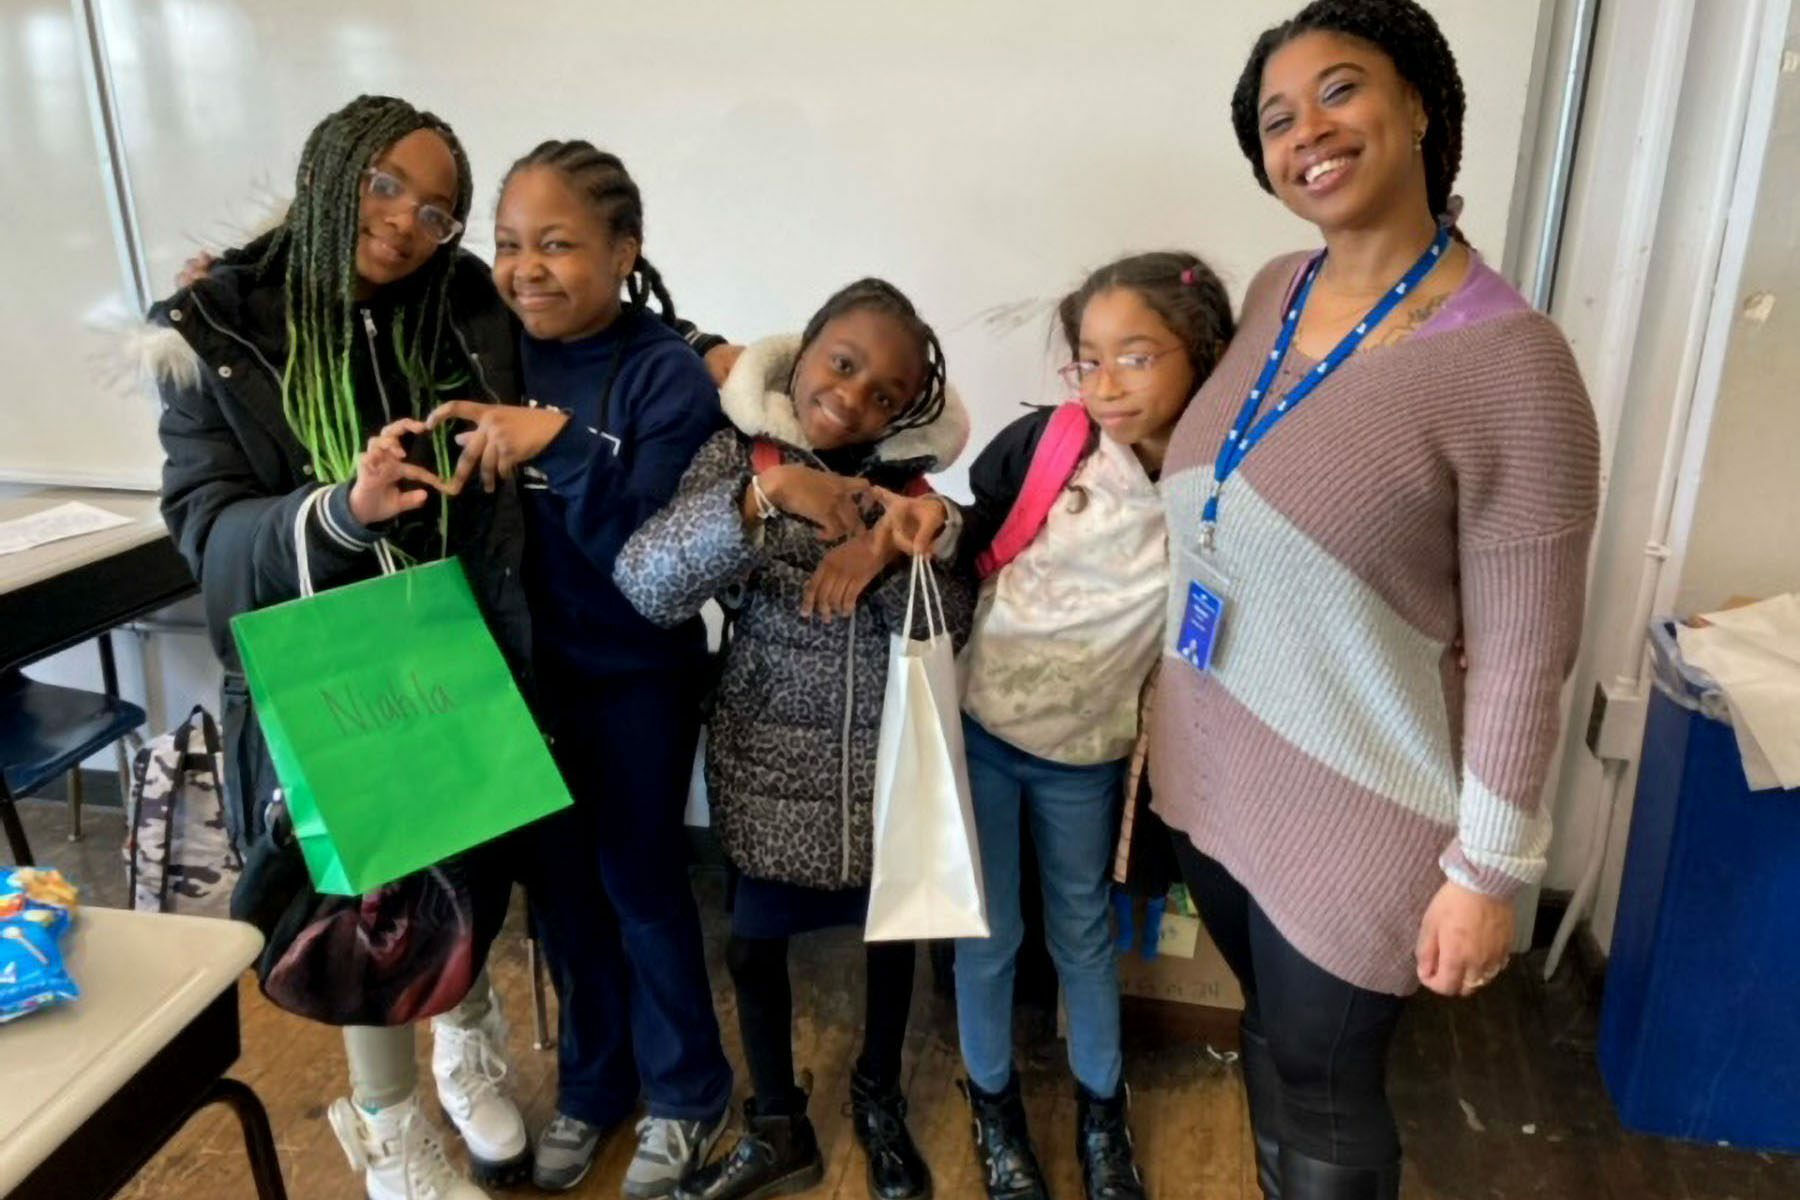 Atiyah Harmon poses for a picture with her students in a classroom